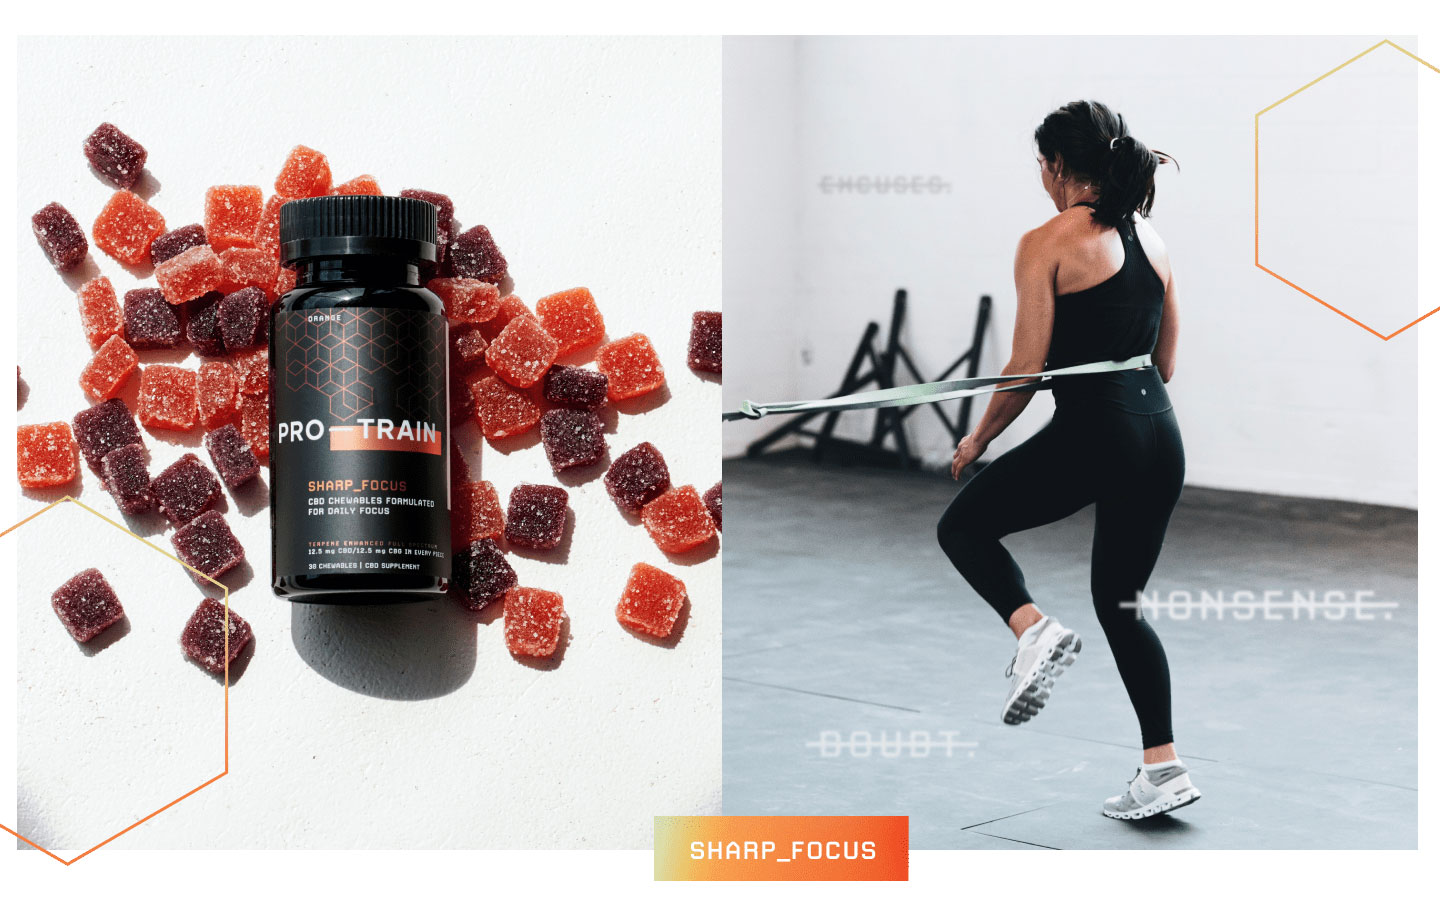 Packaging design for the Pro-Train chewables juxtaposed with an image of an athlete exercising